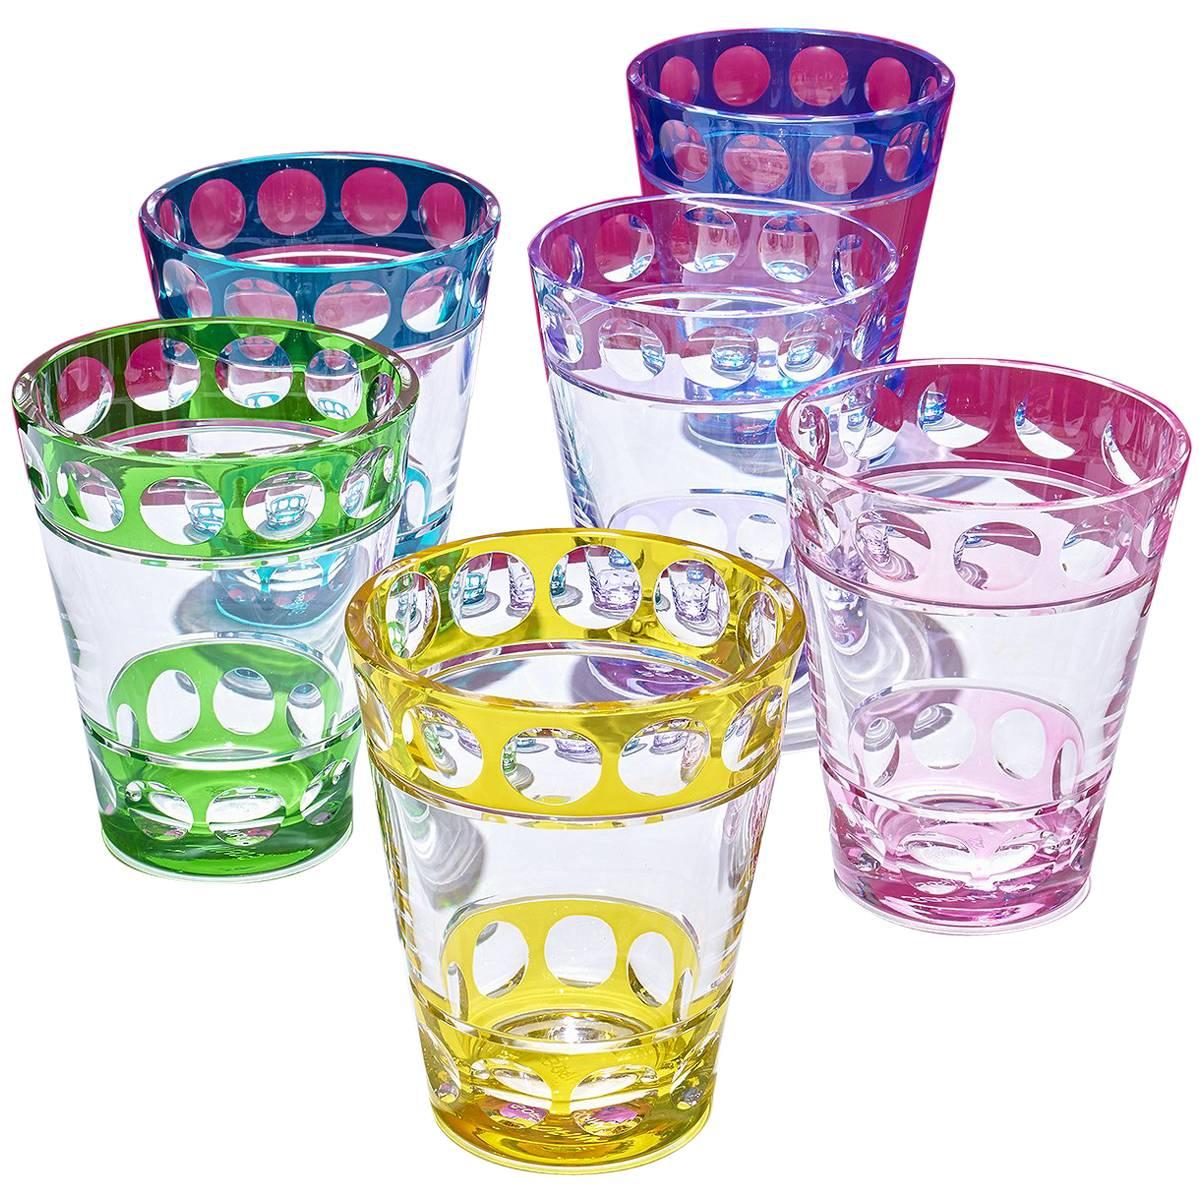 Handblown crystal vase with hand-carved bubble design in six colors. The rim up and down of the vase is coloured in one color and the middle part comes in clear crystal. The round bubbles above and below are carved and polished by hand by Bavarian